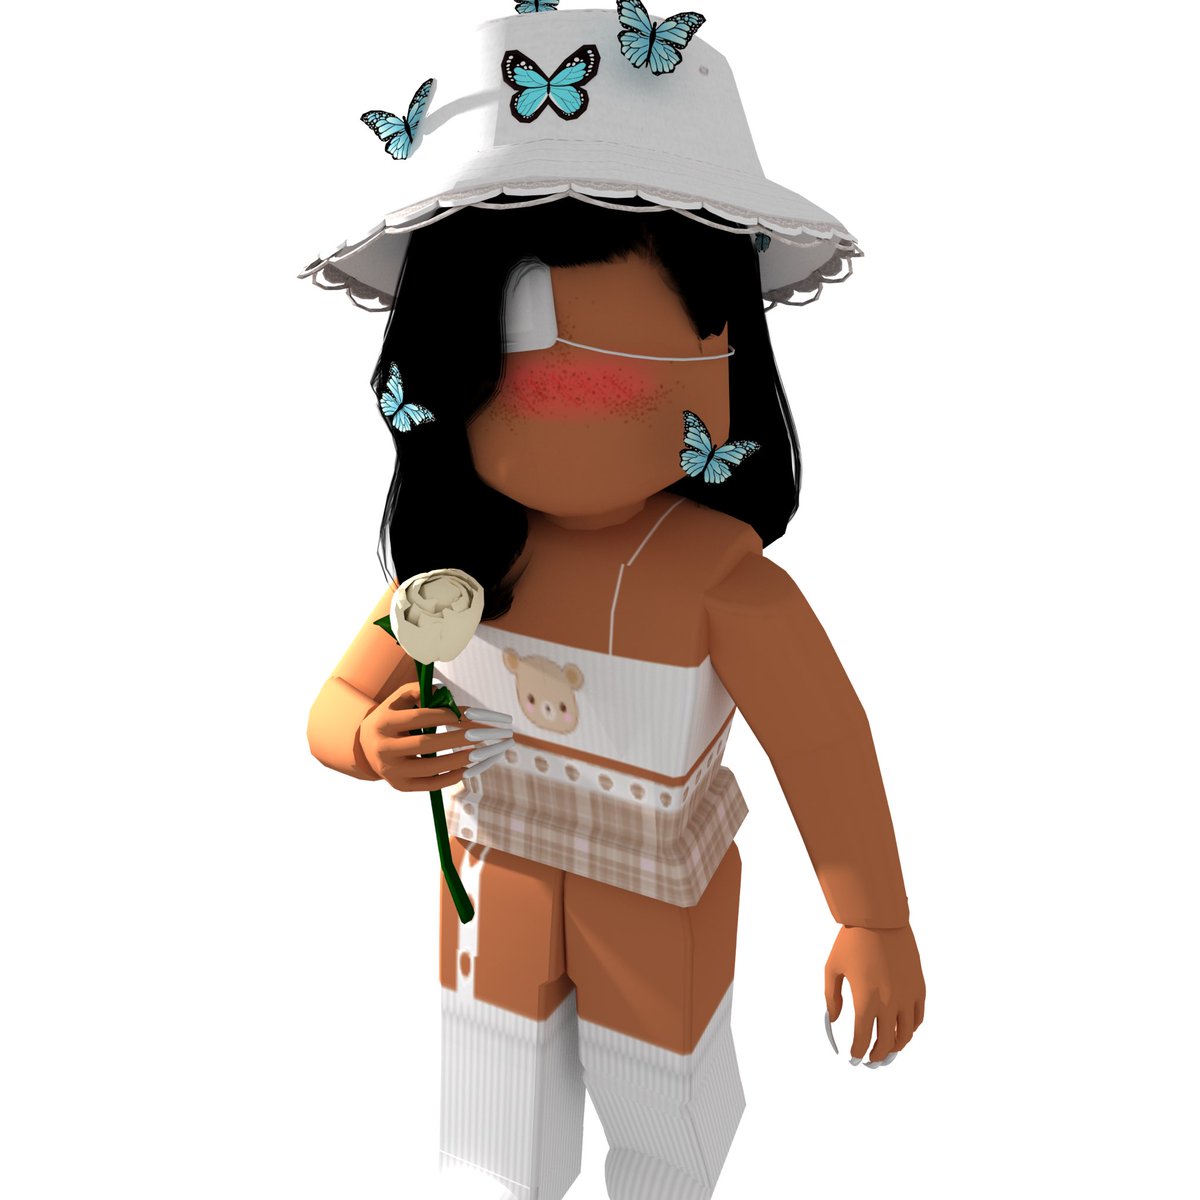 Yafavkialie On Twitter I Also Made This Here S A Transparent Gfx You Can Use For Edits And Such Just Please Give Credit Robloxart Roblox Robloxdesigner Robloxgfx Robloxdev Https T Co Jdcphpdtmi - fhozzy on twitter roblox a gfx of my avatar i made a